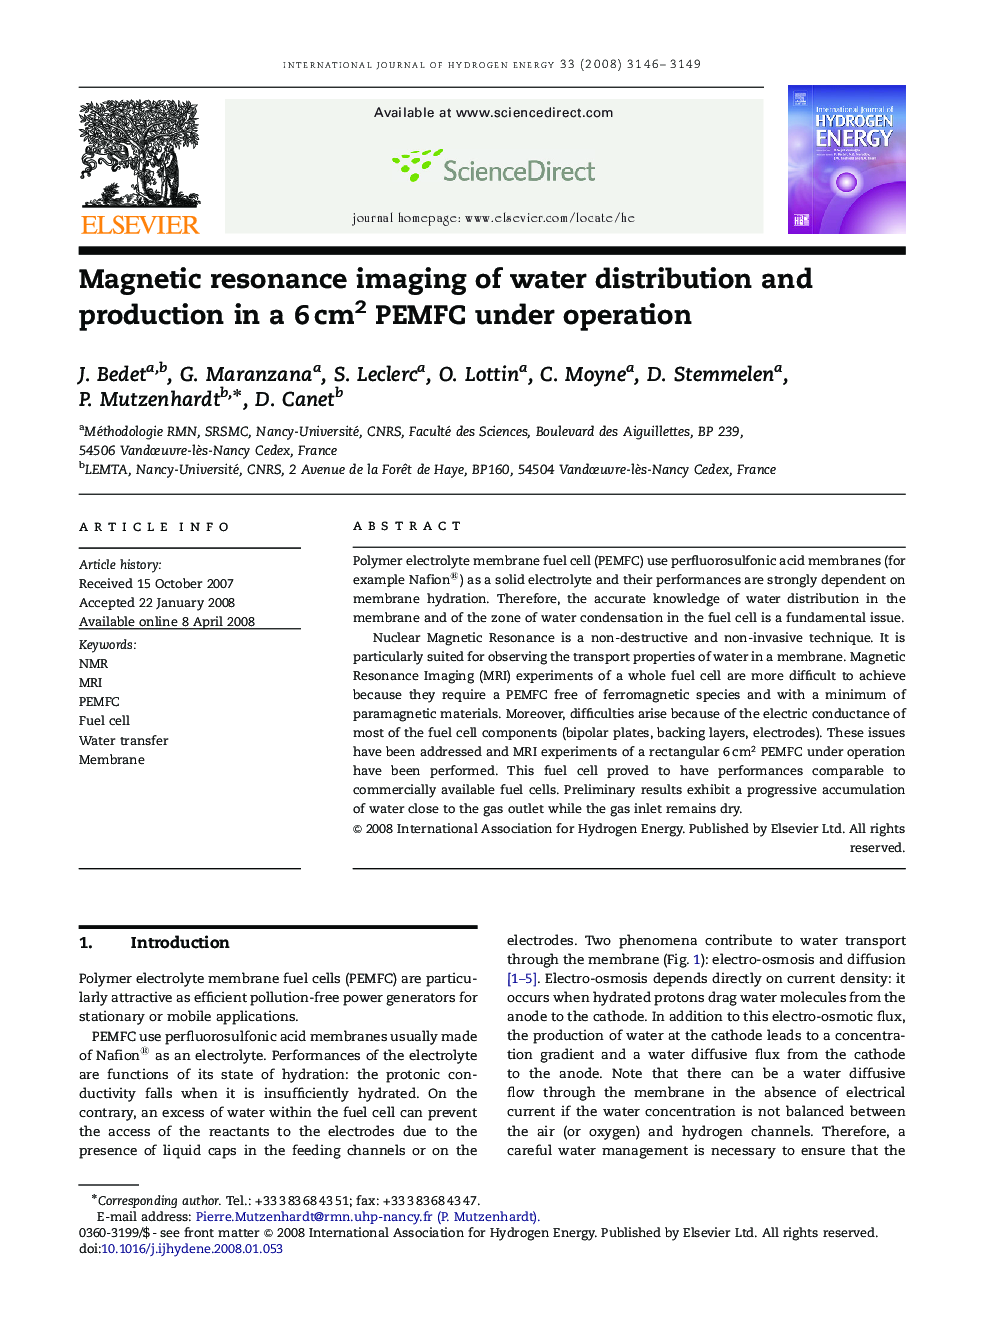 Magnetic resonance imaging of water distribution and production in a 6 cm2 PEMFC under operation